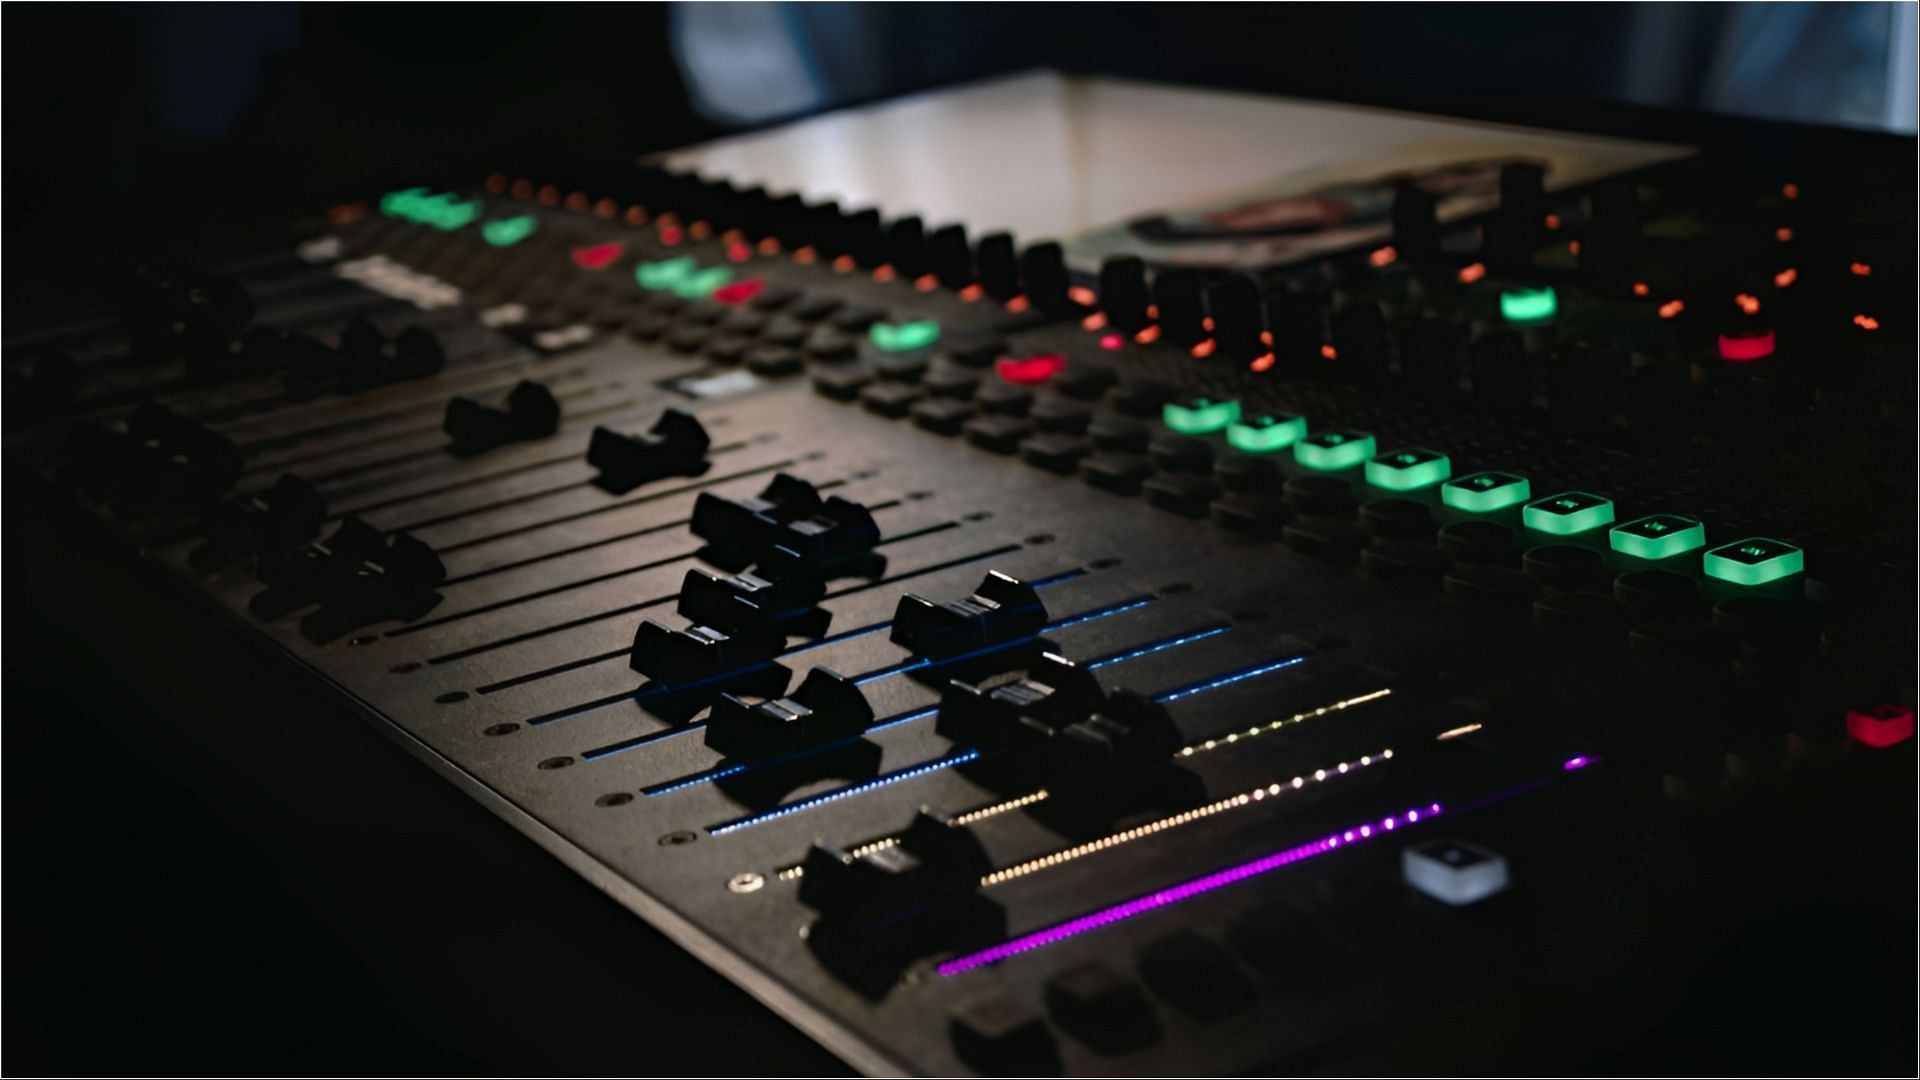 A sound engineer has died at his home as revealed by his sister (Representative image via Unsplash)